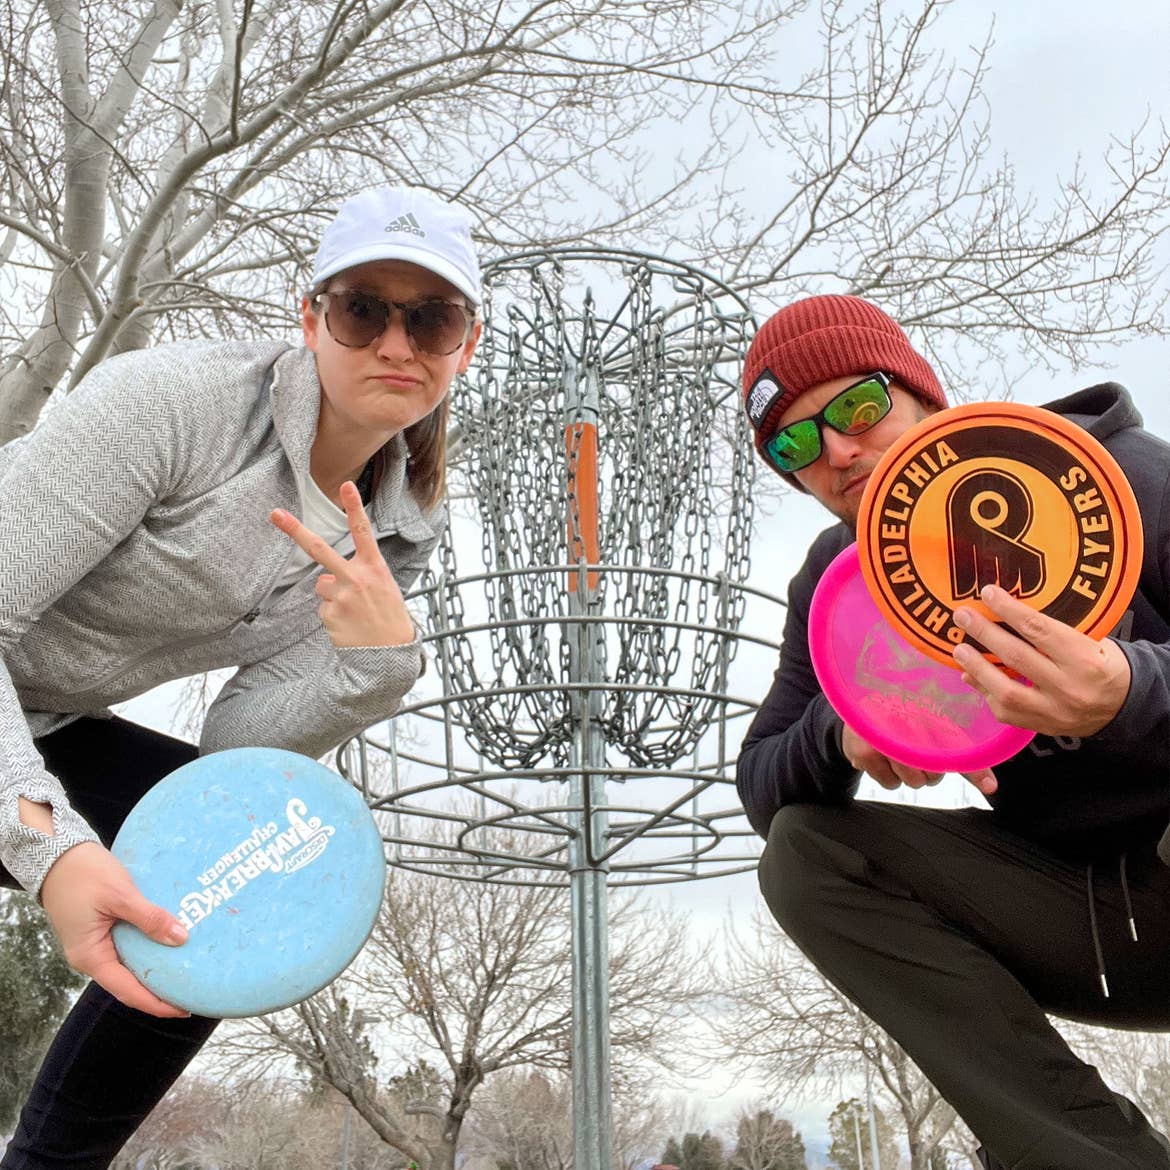 A woman wearing a grey pullover, white cap and holding a blue frisbee disc stands next to a man in a black pullover and red knitted cap holding two frisbee discs near an outdoor disc golf basket.